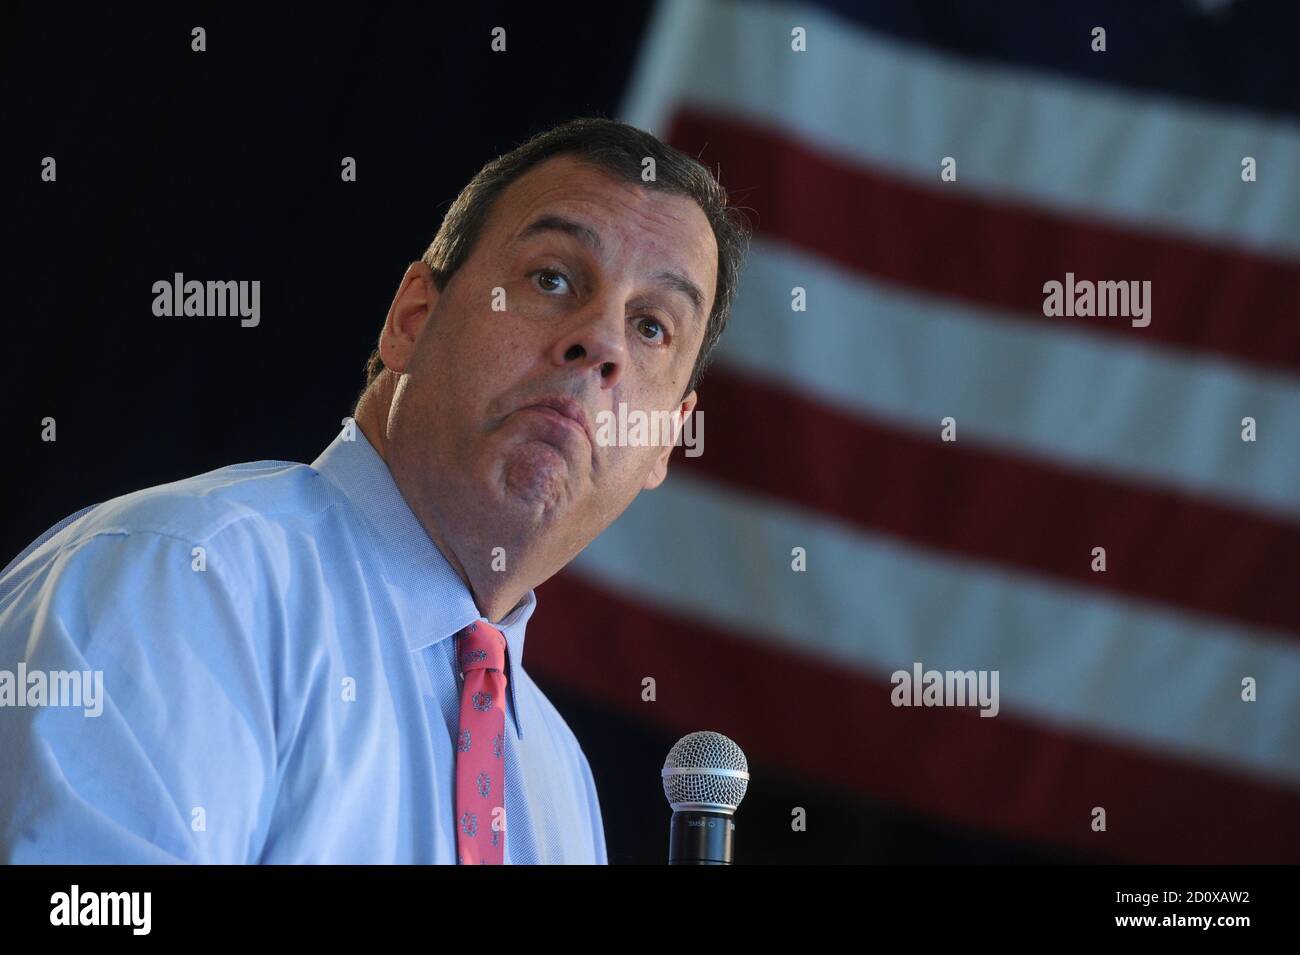 FAIR LAWN, NJ - JANUARY 21: New Jersey Governor Chris Christie holds a town-hall meeting at the Fair Lawn Recreation Center. on March 3, 2014 in Fair Lawn, New Jersey People: New Jersey Governor Chris Christie Credit: Storms Media Group/Alamy Live News Stock Photo